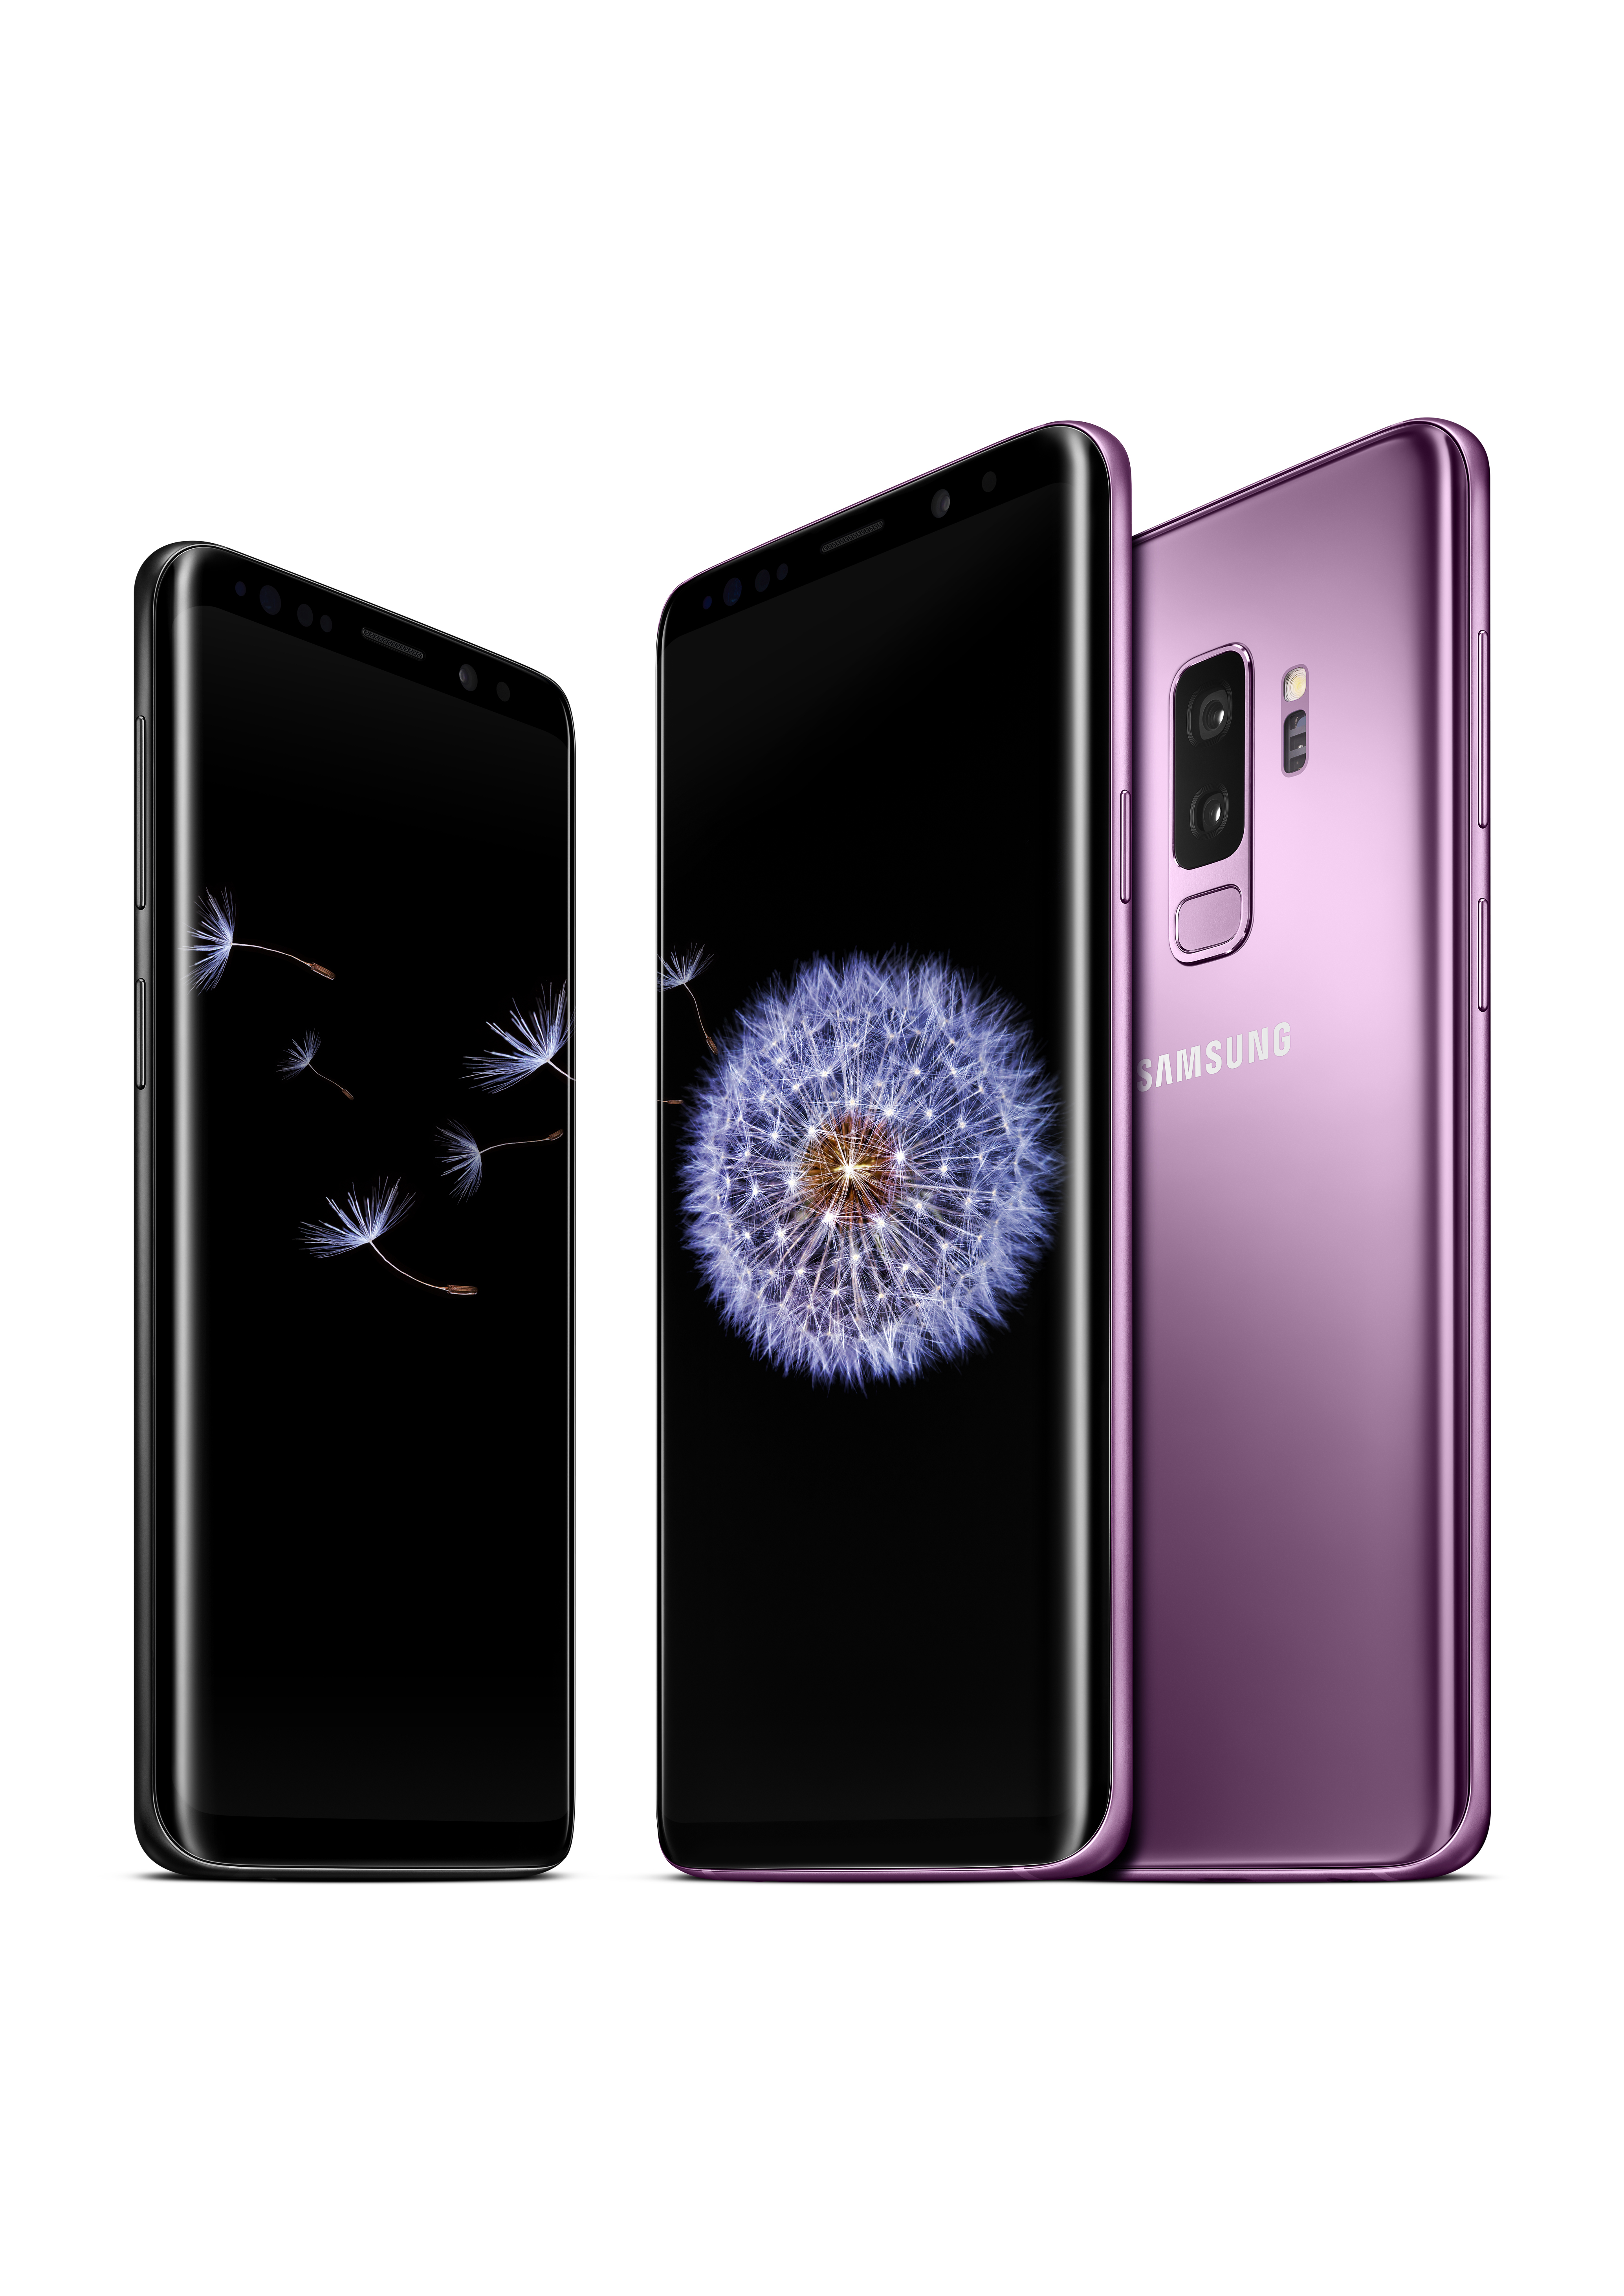 Samsung Galaxy S9 and Galaxy S9+ product image